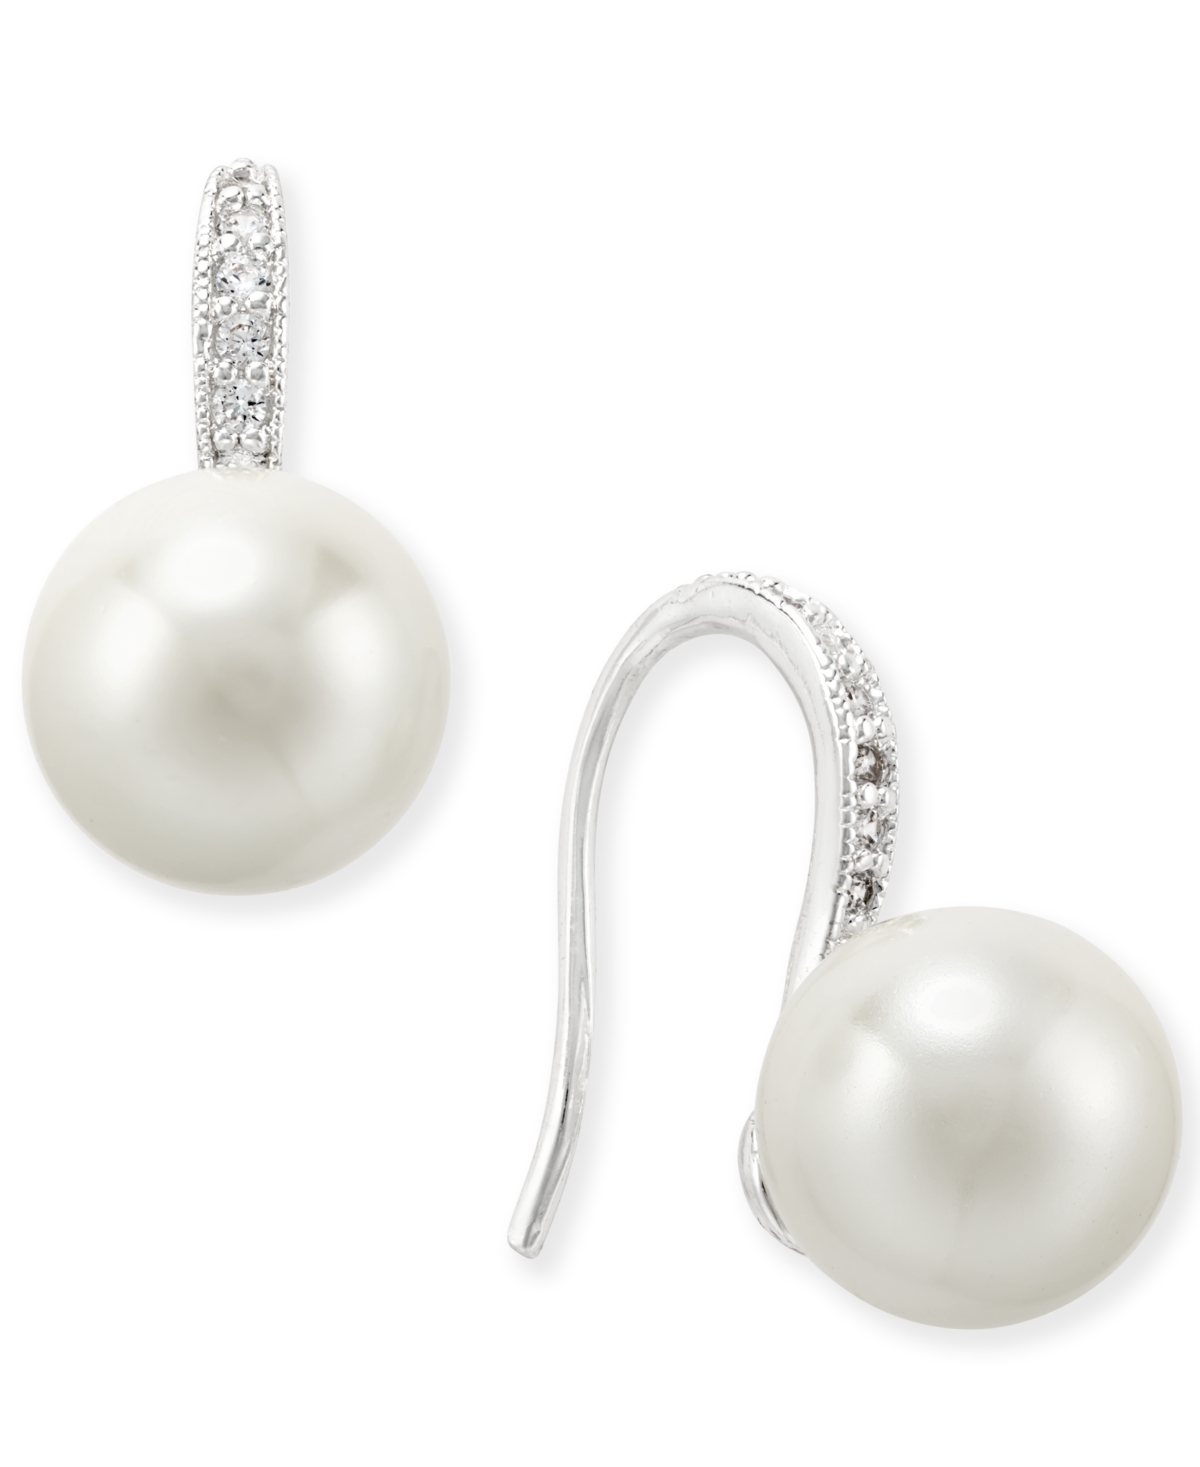 Silver-Tone Imitation Pearl and Pave Drop Earrings, Created for Macy's - White